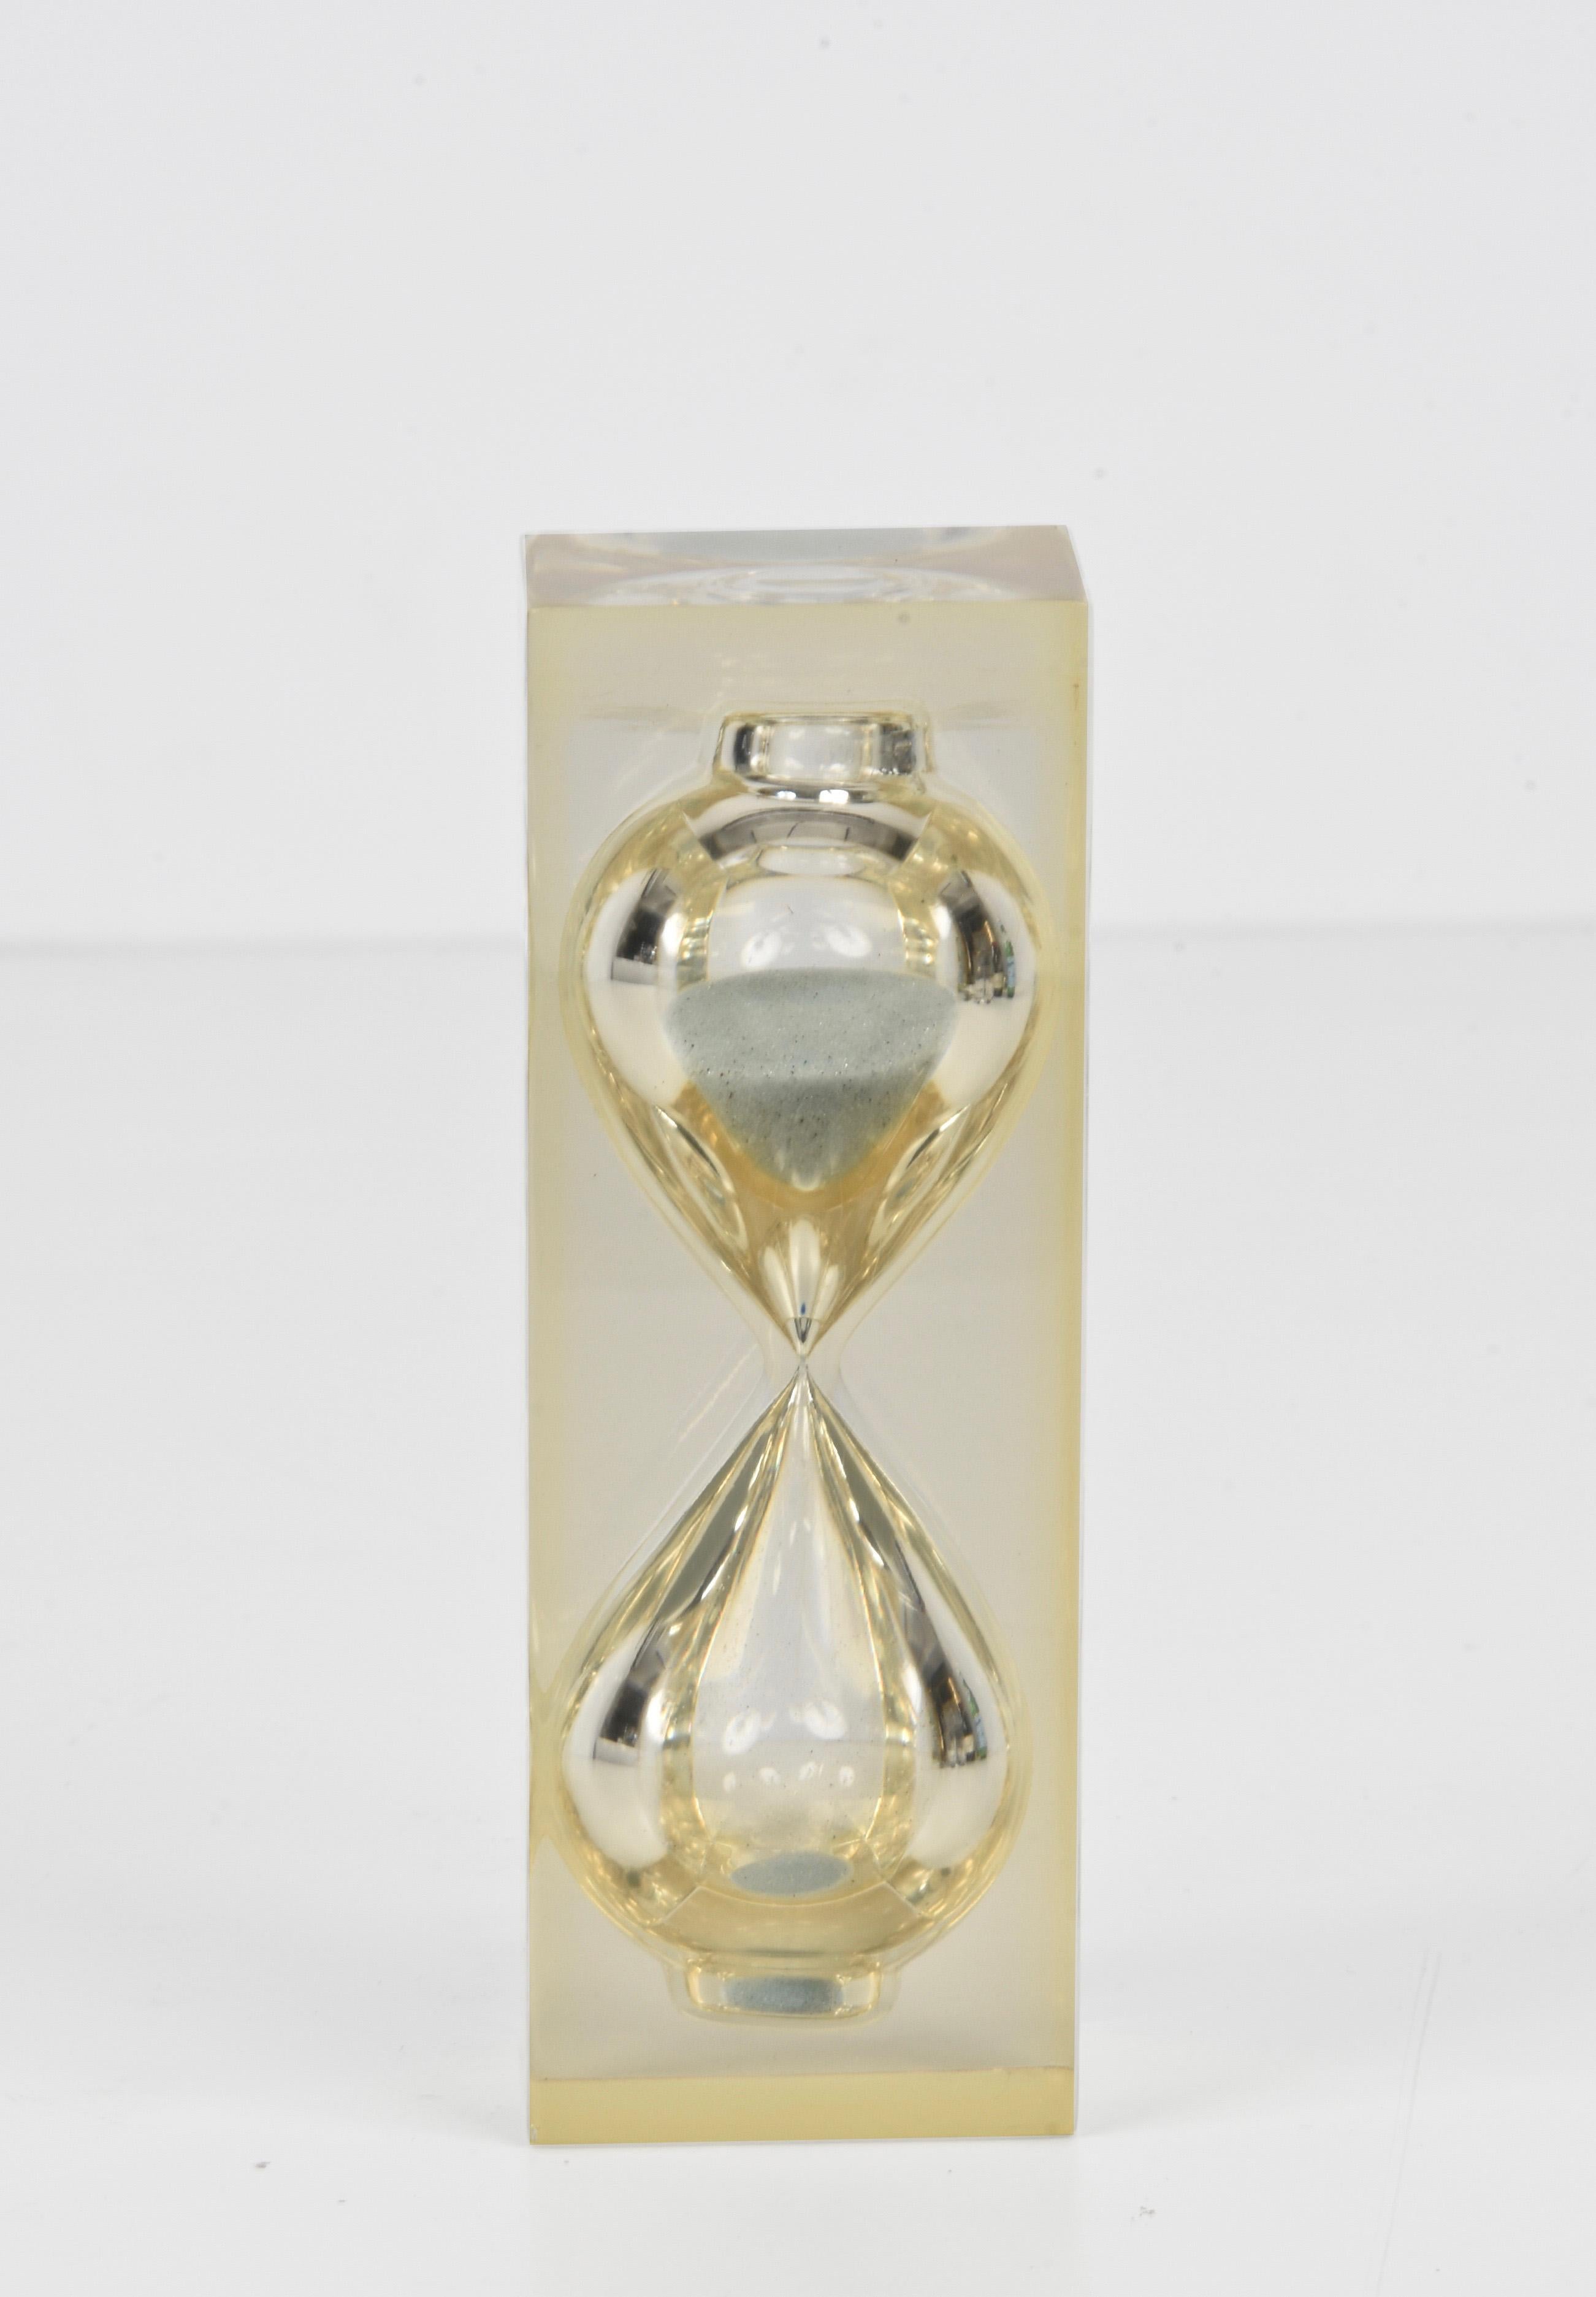 Italian Midcentury Lucite Hourglass Sand Timer Sculpture After Charles Hollis Jones 1970 For Sale